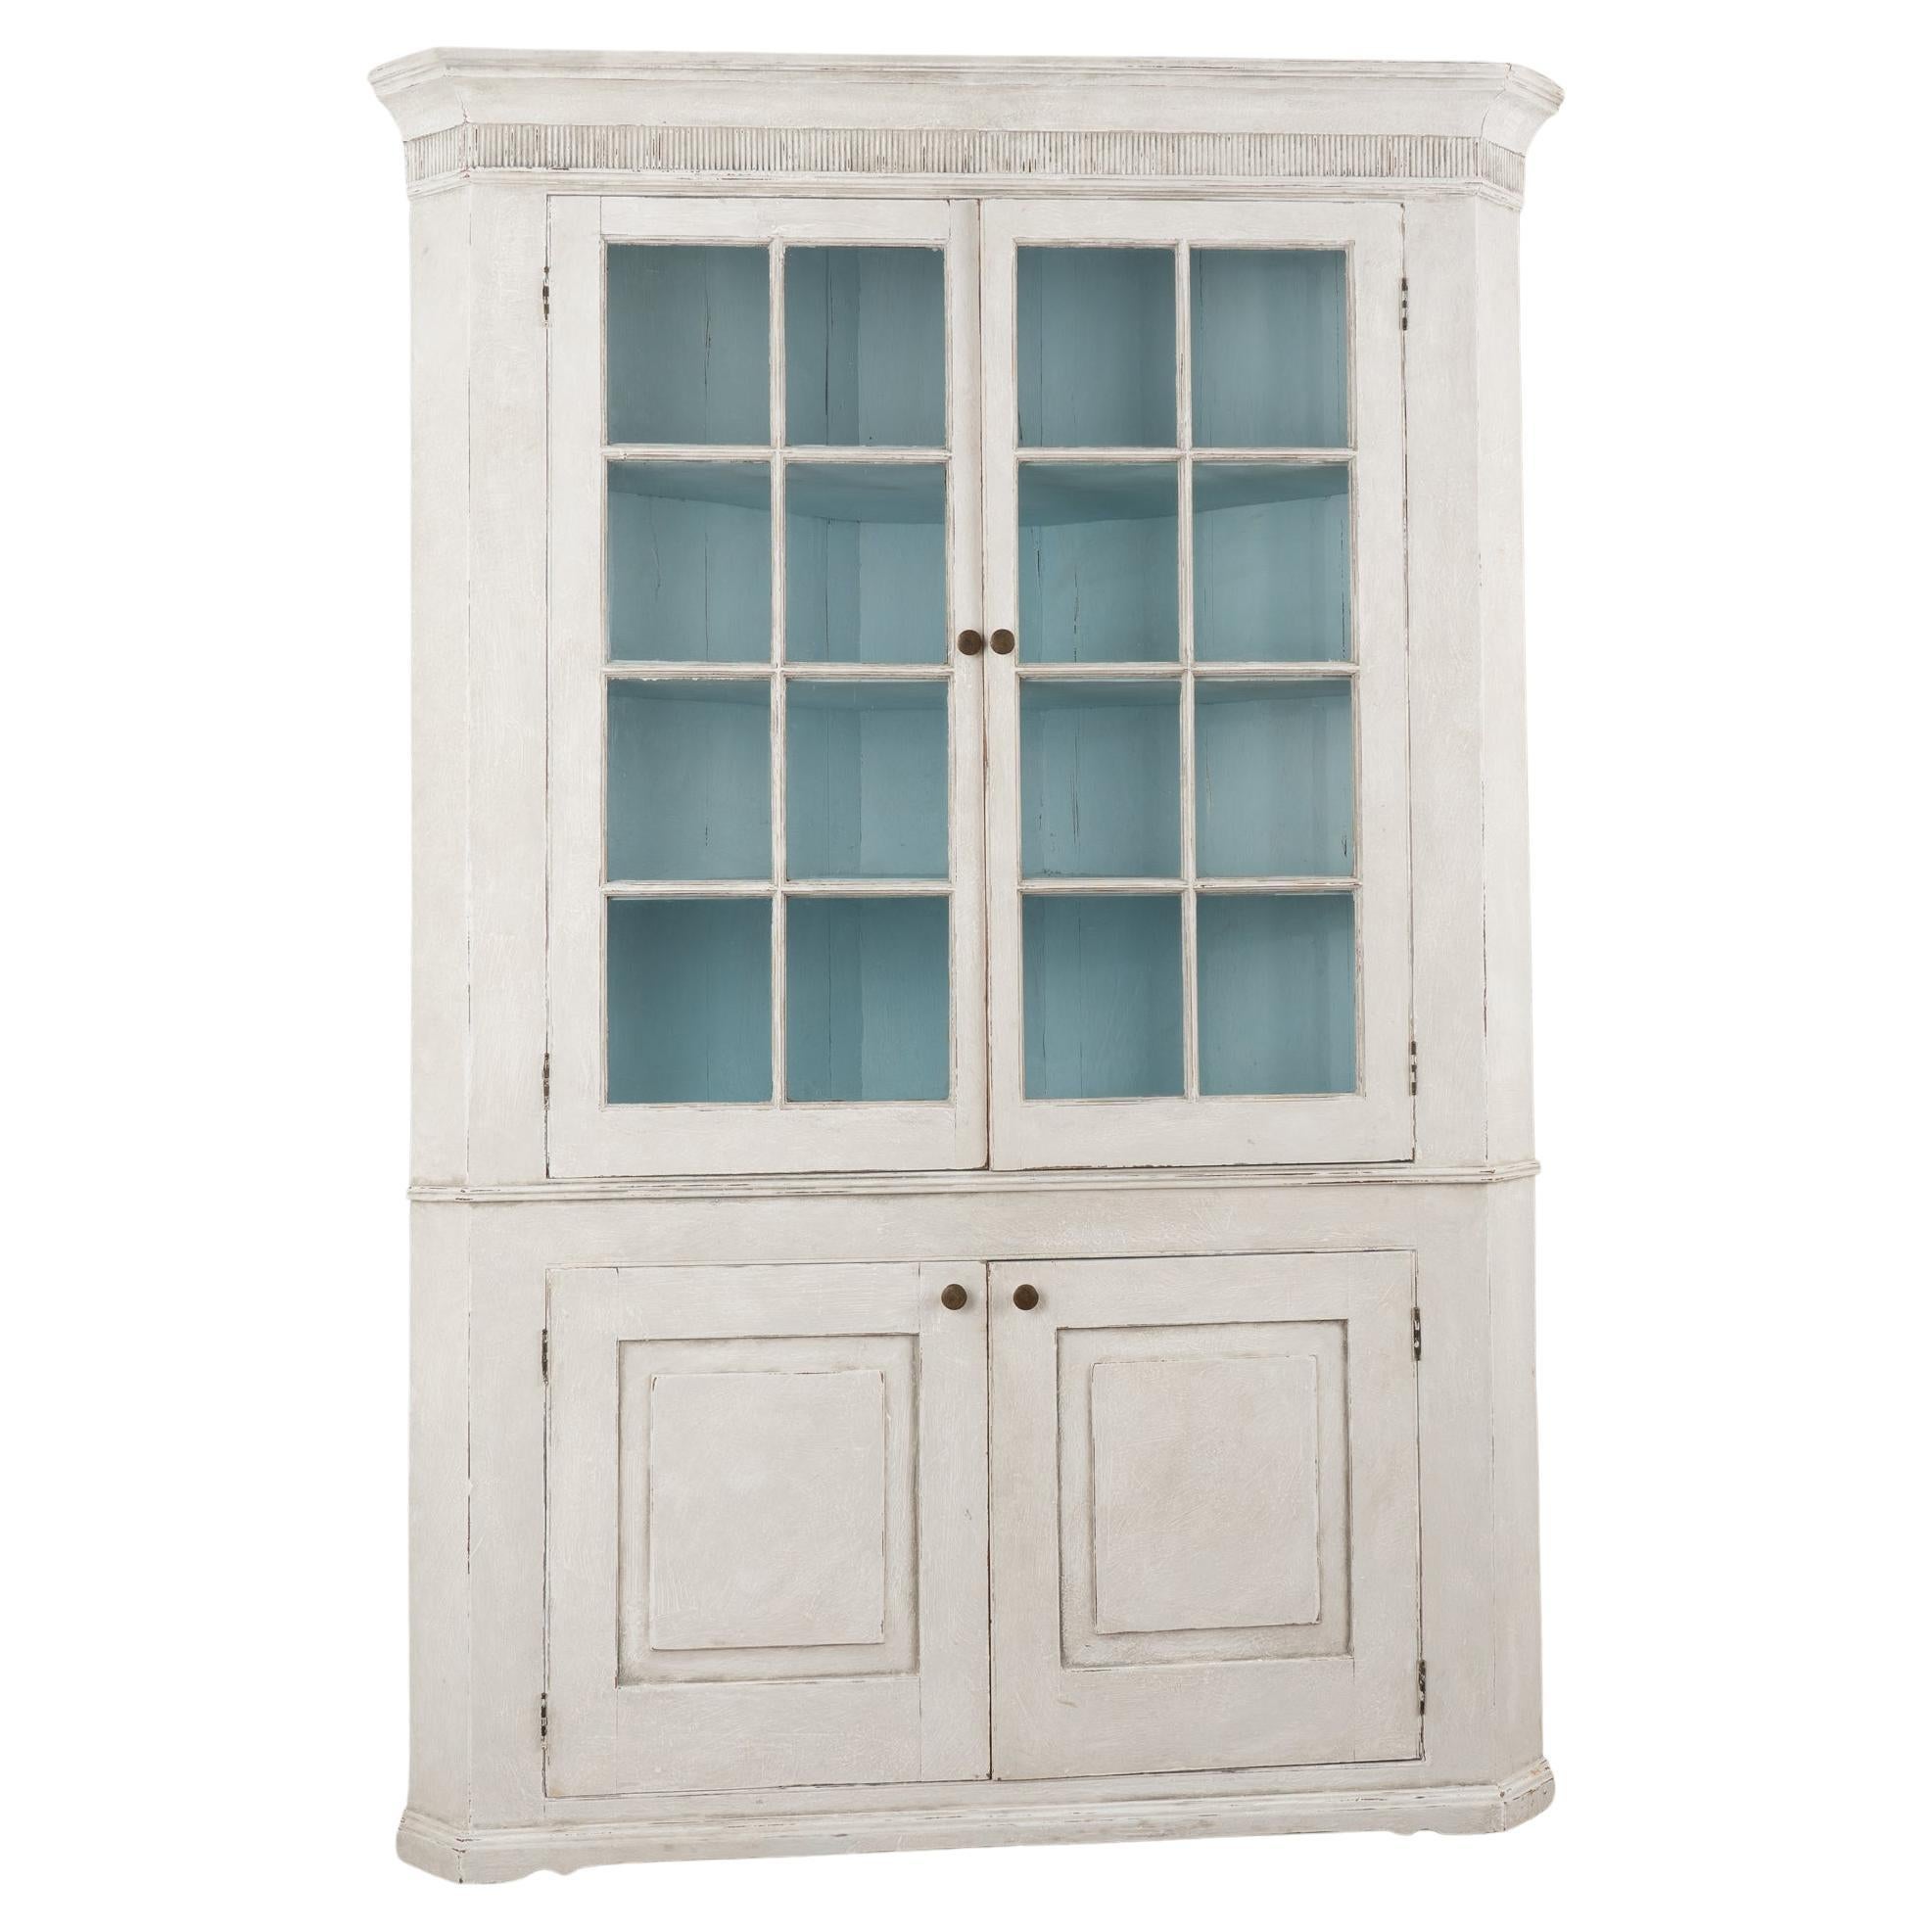 Gray Painted Corner Cabinet With Pane Glass, Sweden circa 1840-60